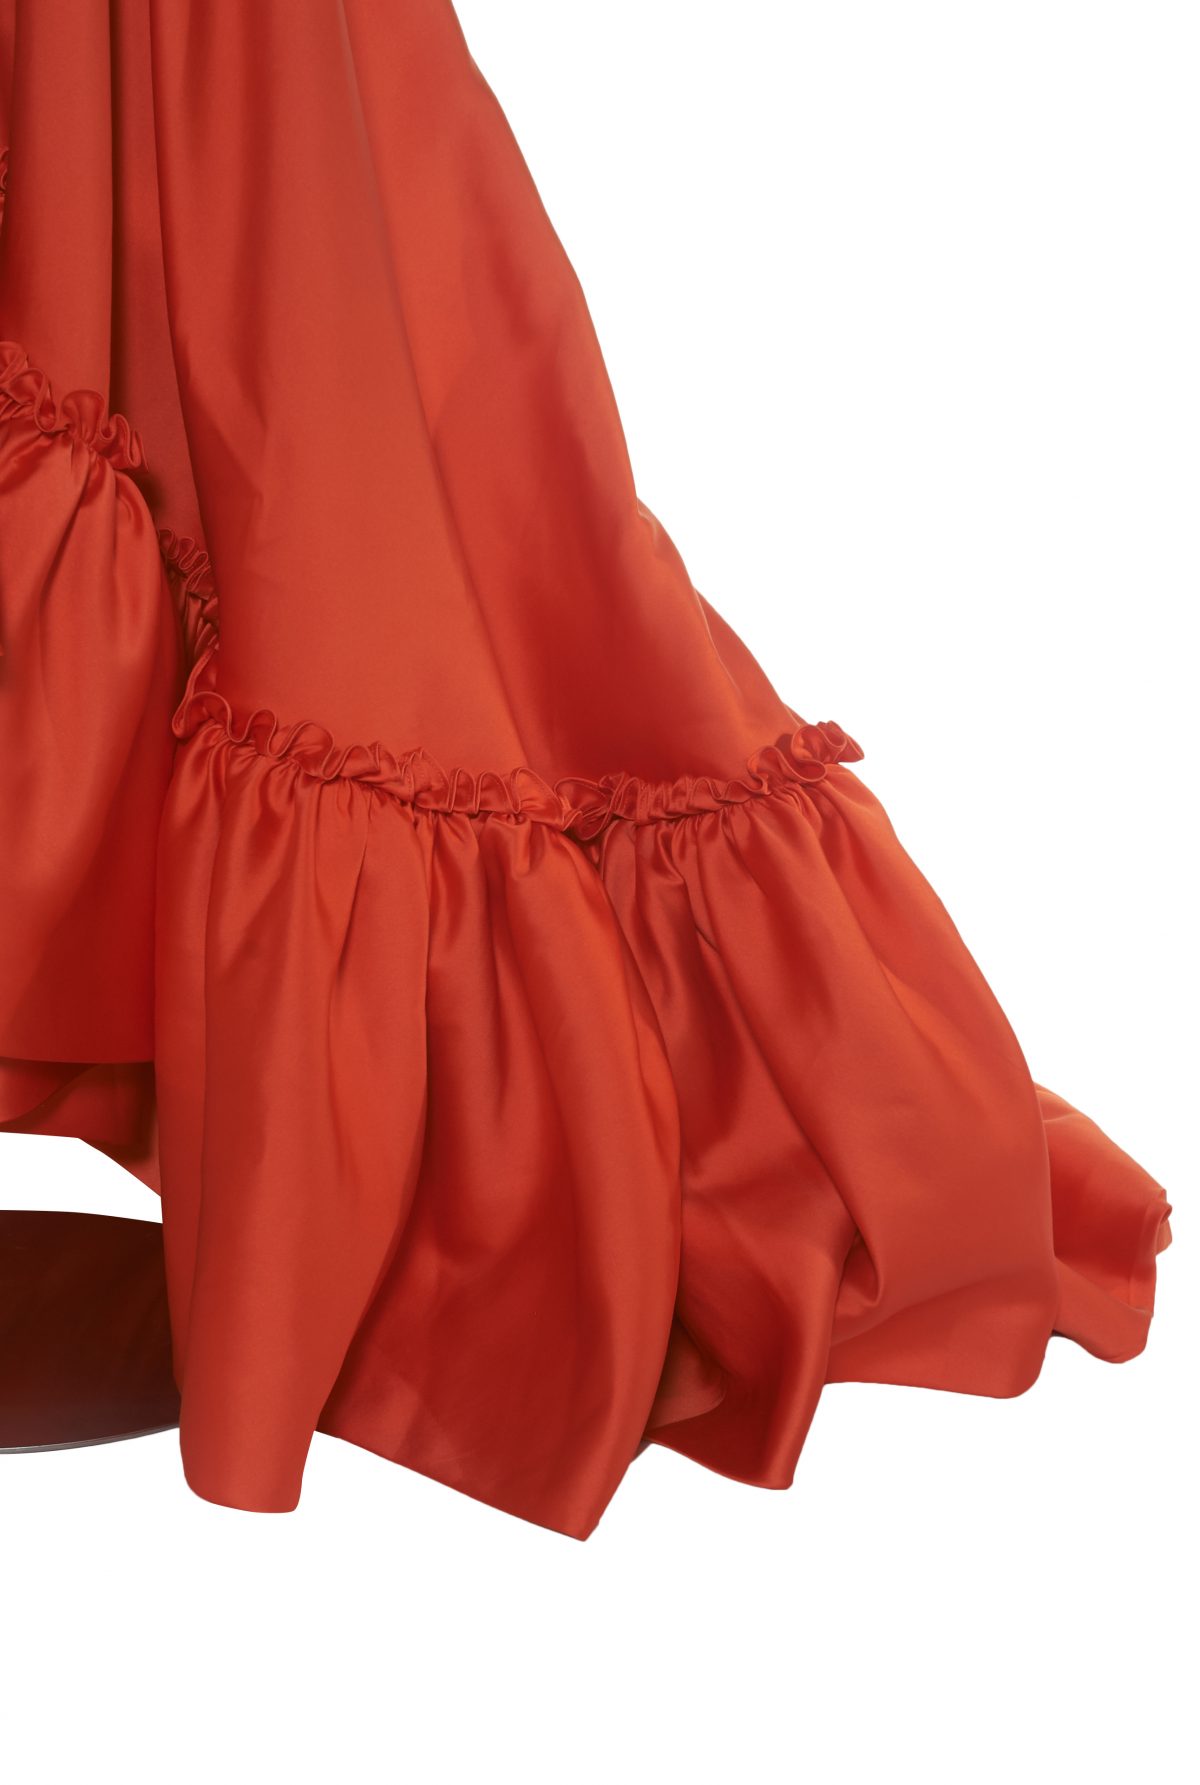 Andrew Gown Orange High Low Dress - Janet Mandell